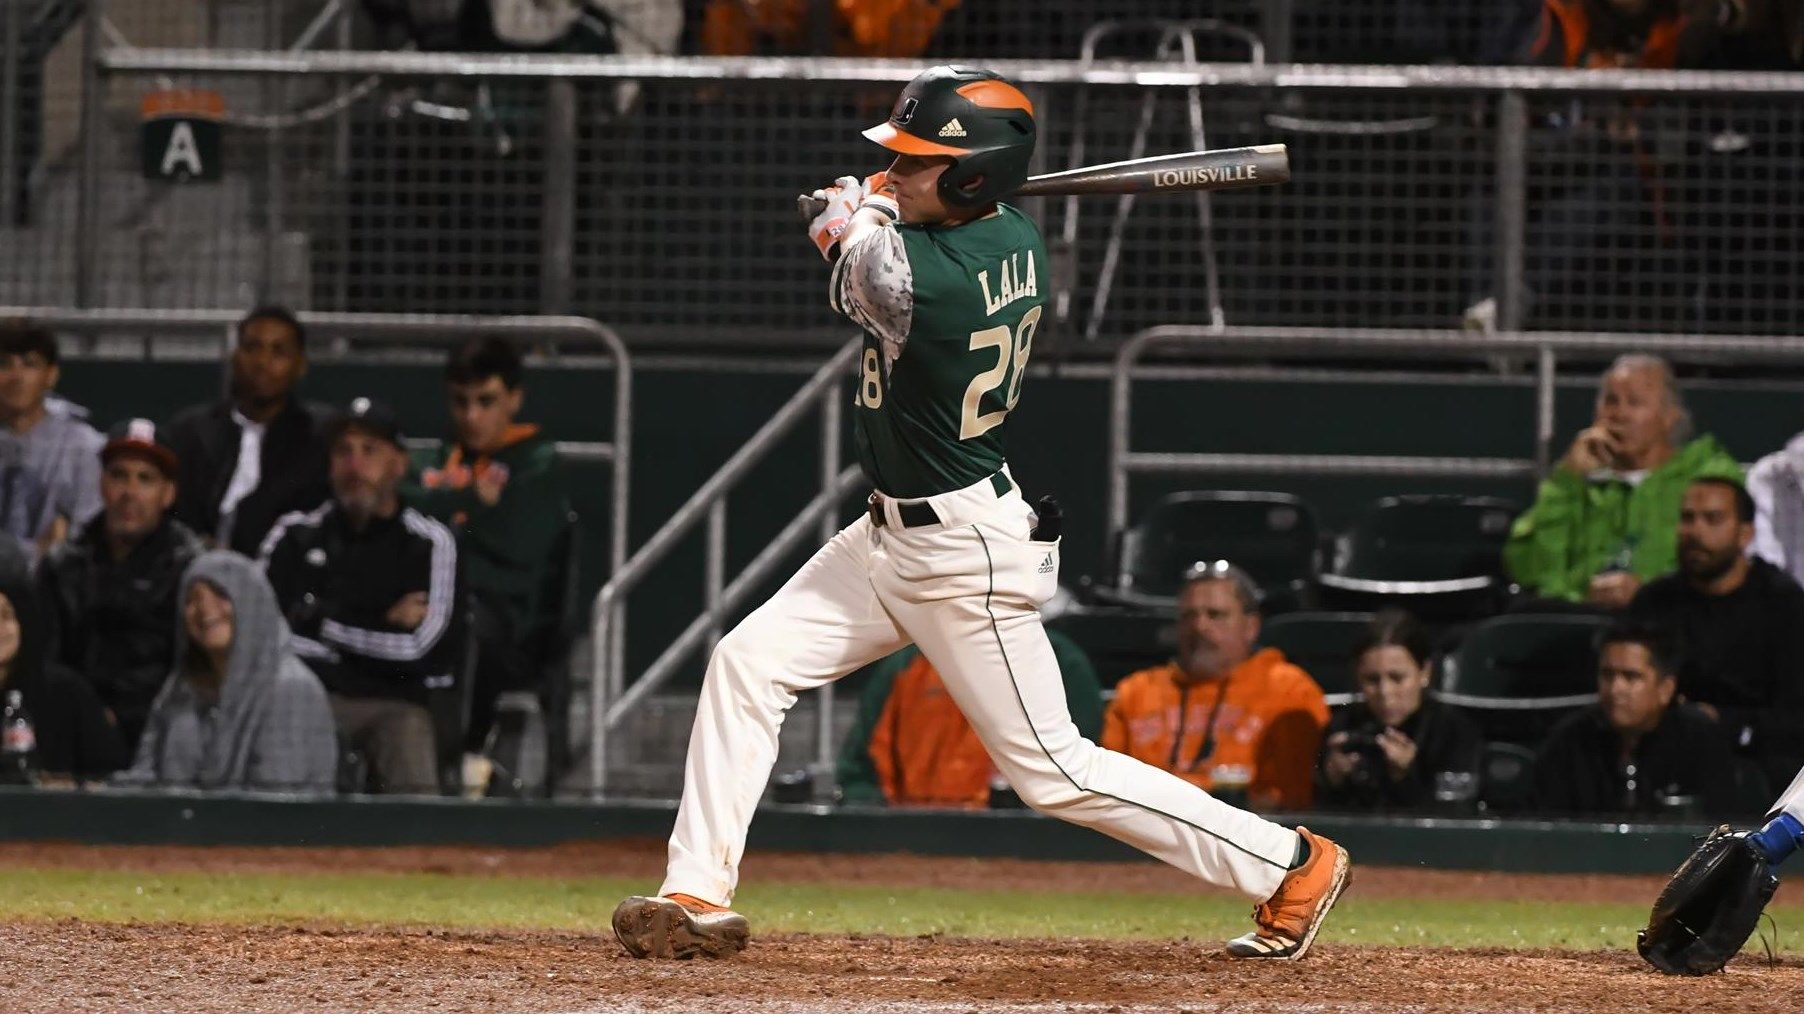 Canes Blank Pitt to Clinch Series, 5-0